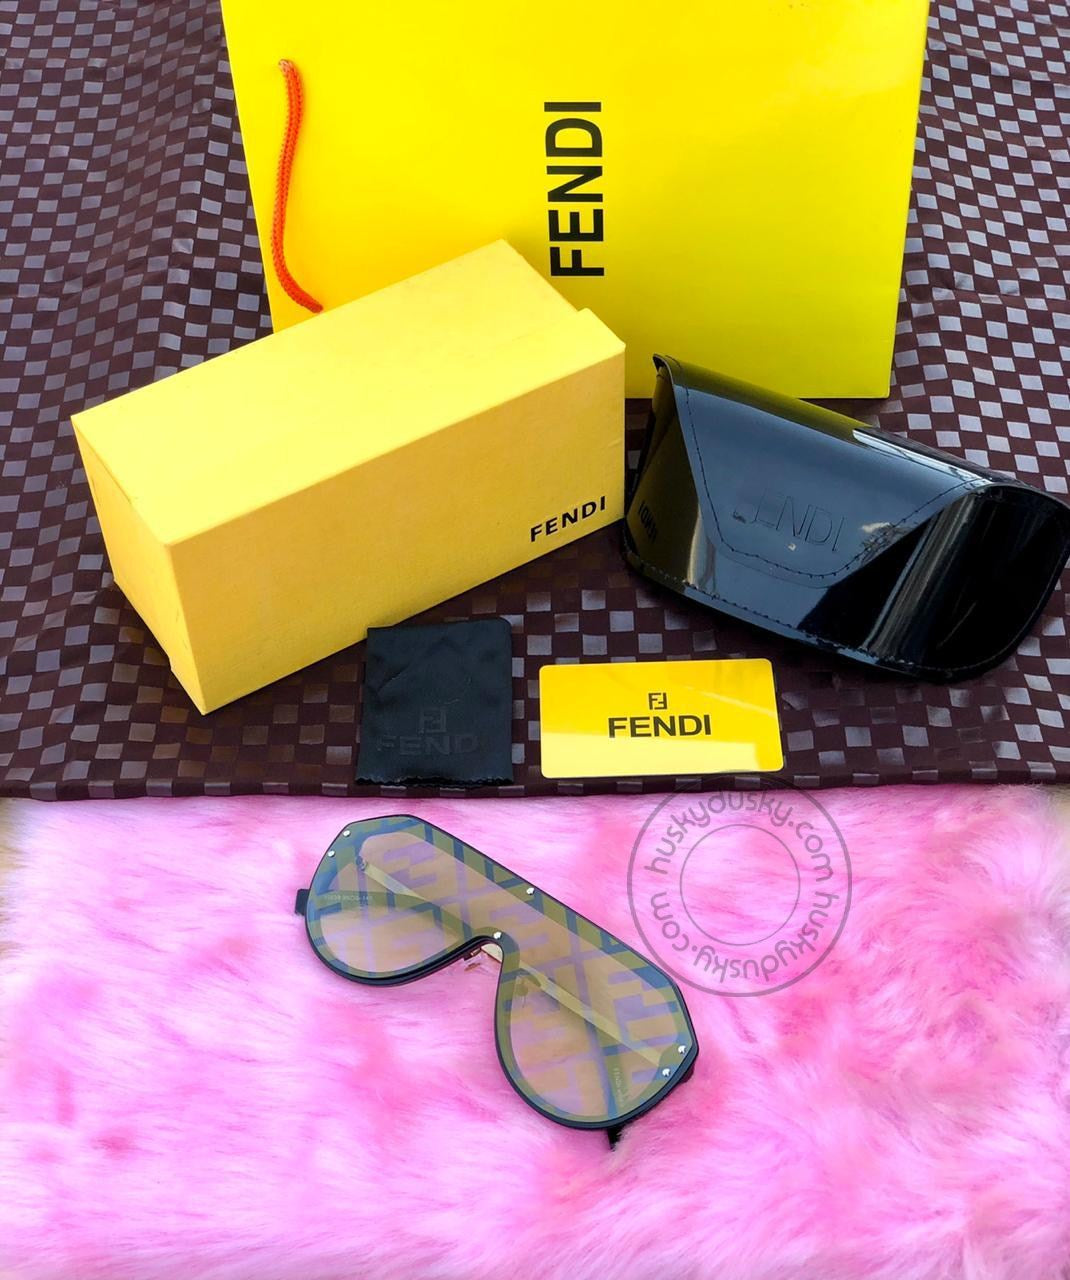 FENDI BRANDED Men's SUNGLASS FOR Man FOR MEN's YELLOW SHADE SUNGLASS WITH GOLD&BLACK STICK FN-03 FOR MAN GIFT